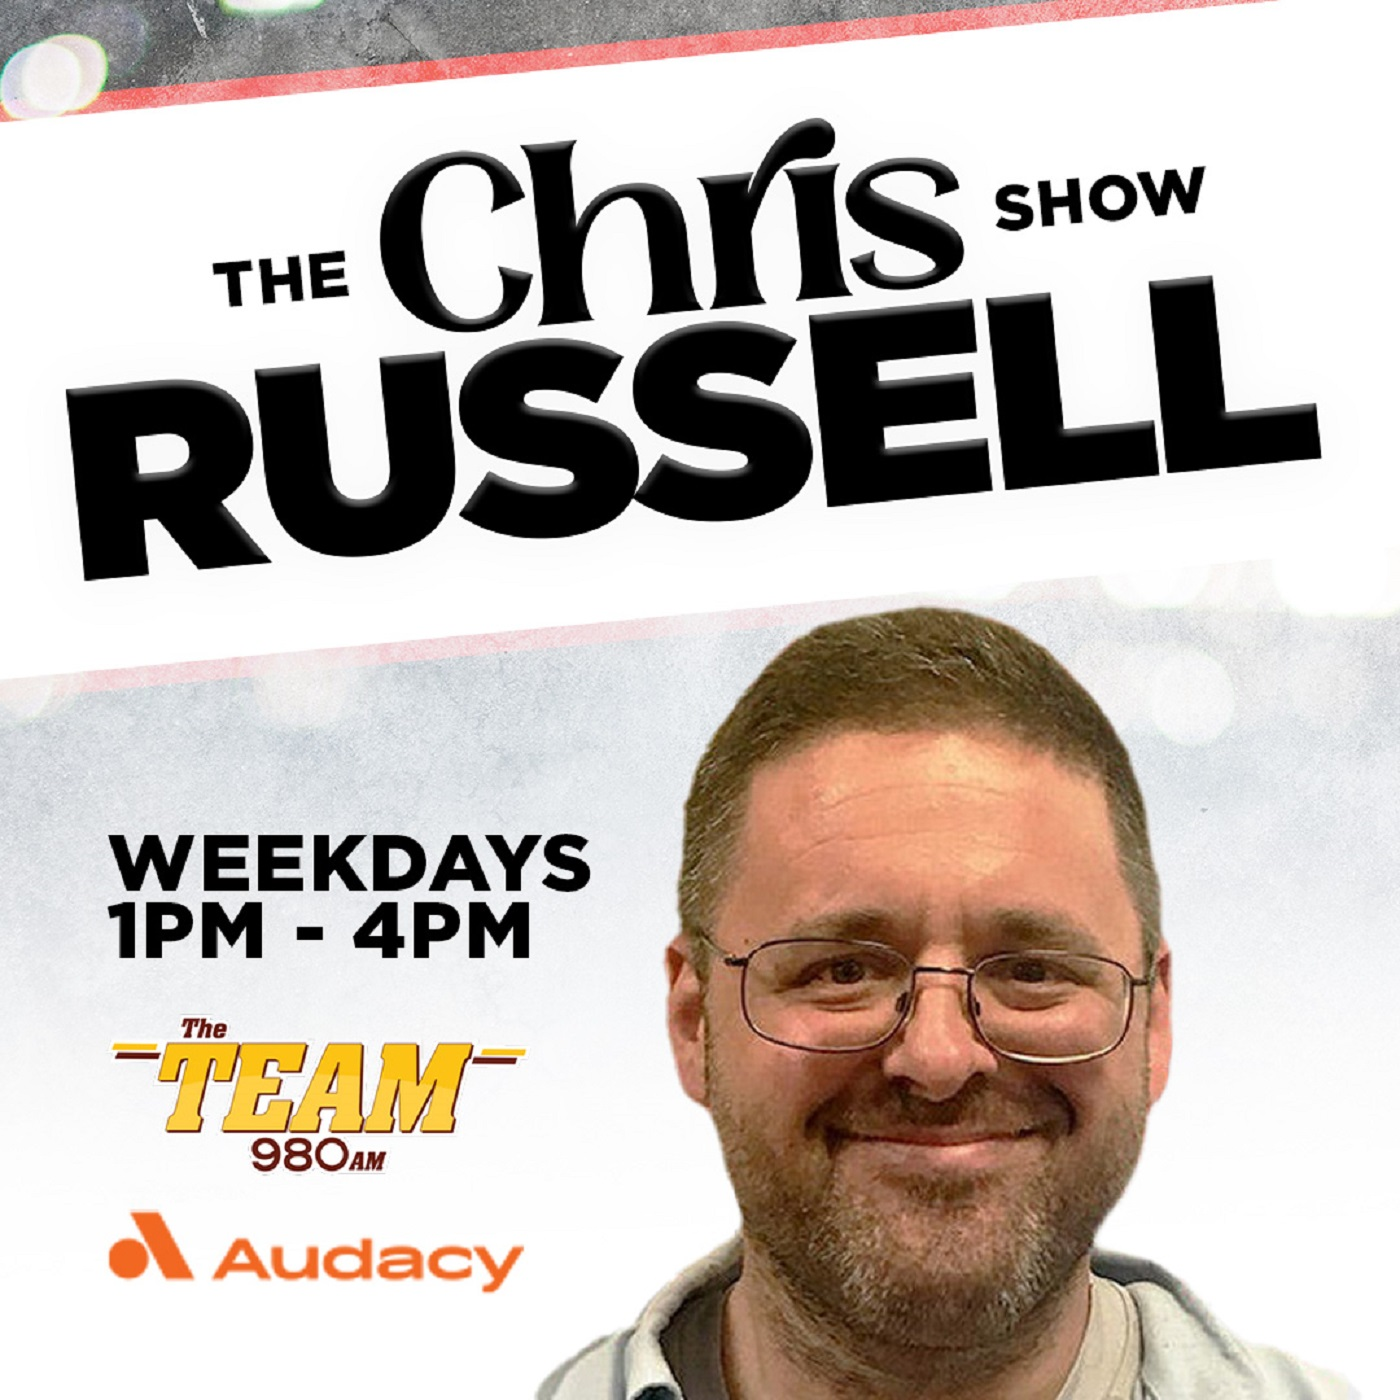 Russell And Medhurst Hour 3 : Nationals and Around the league